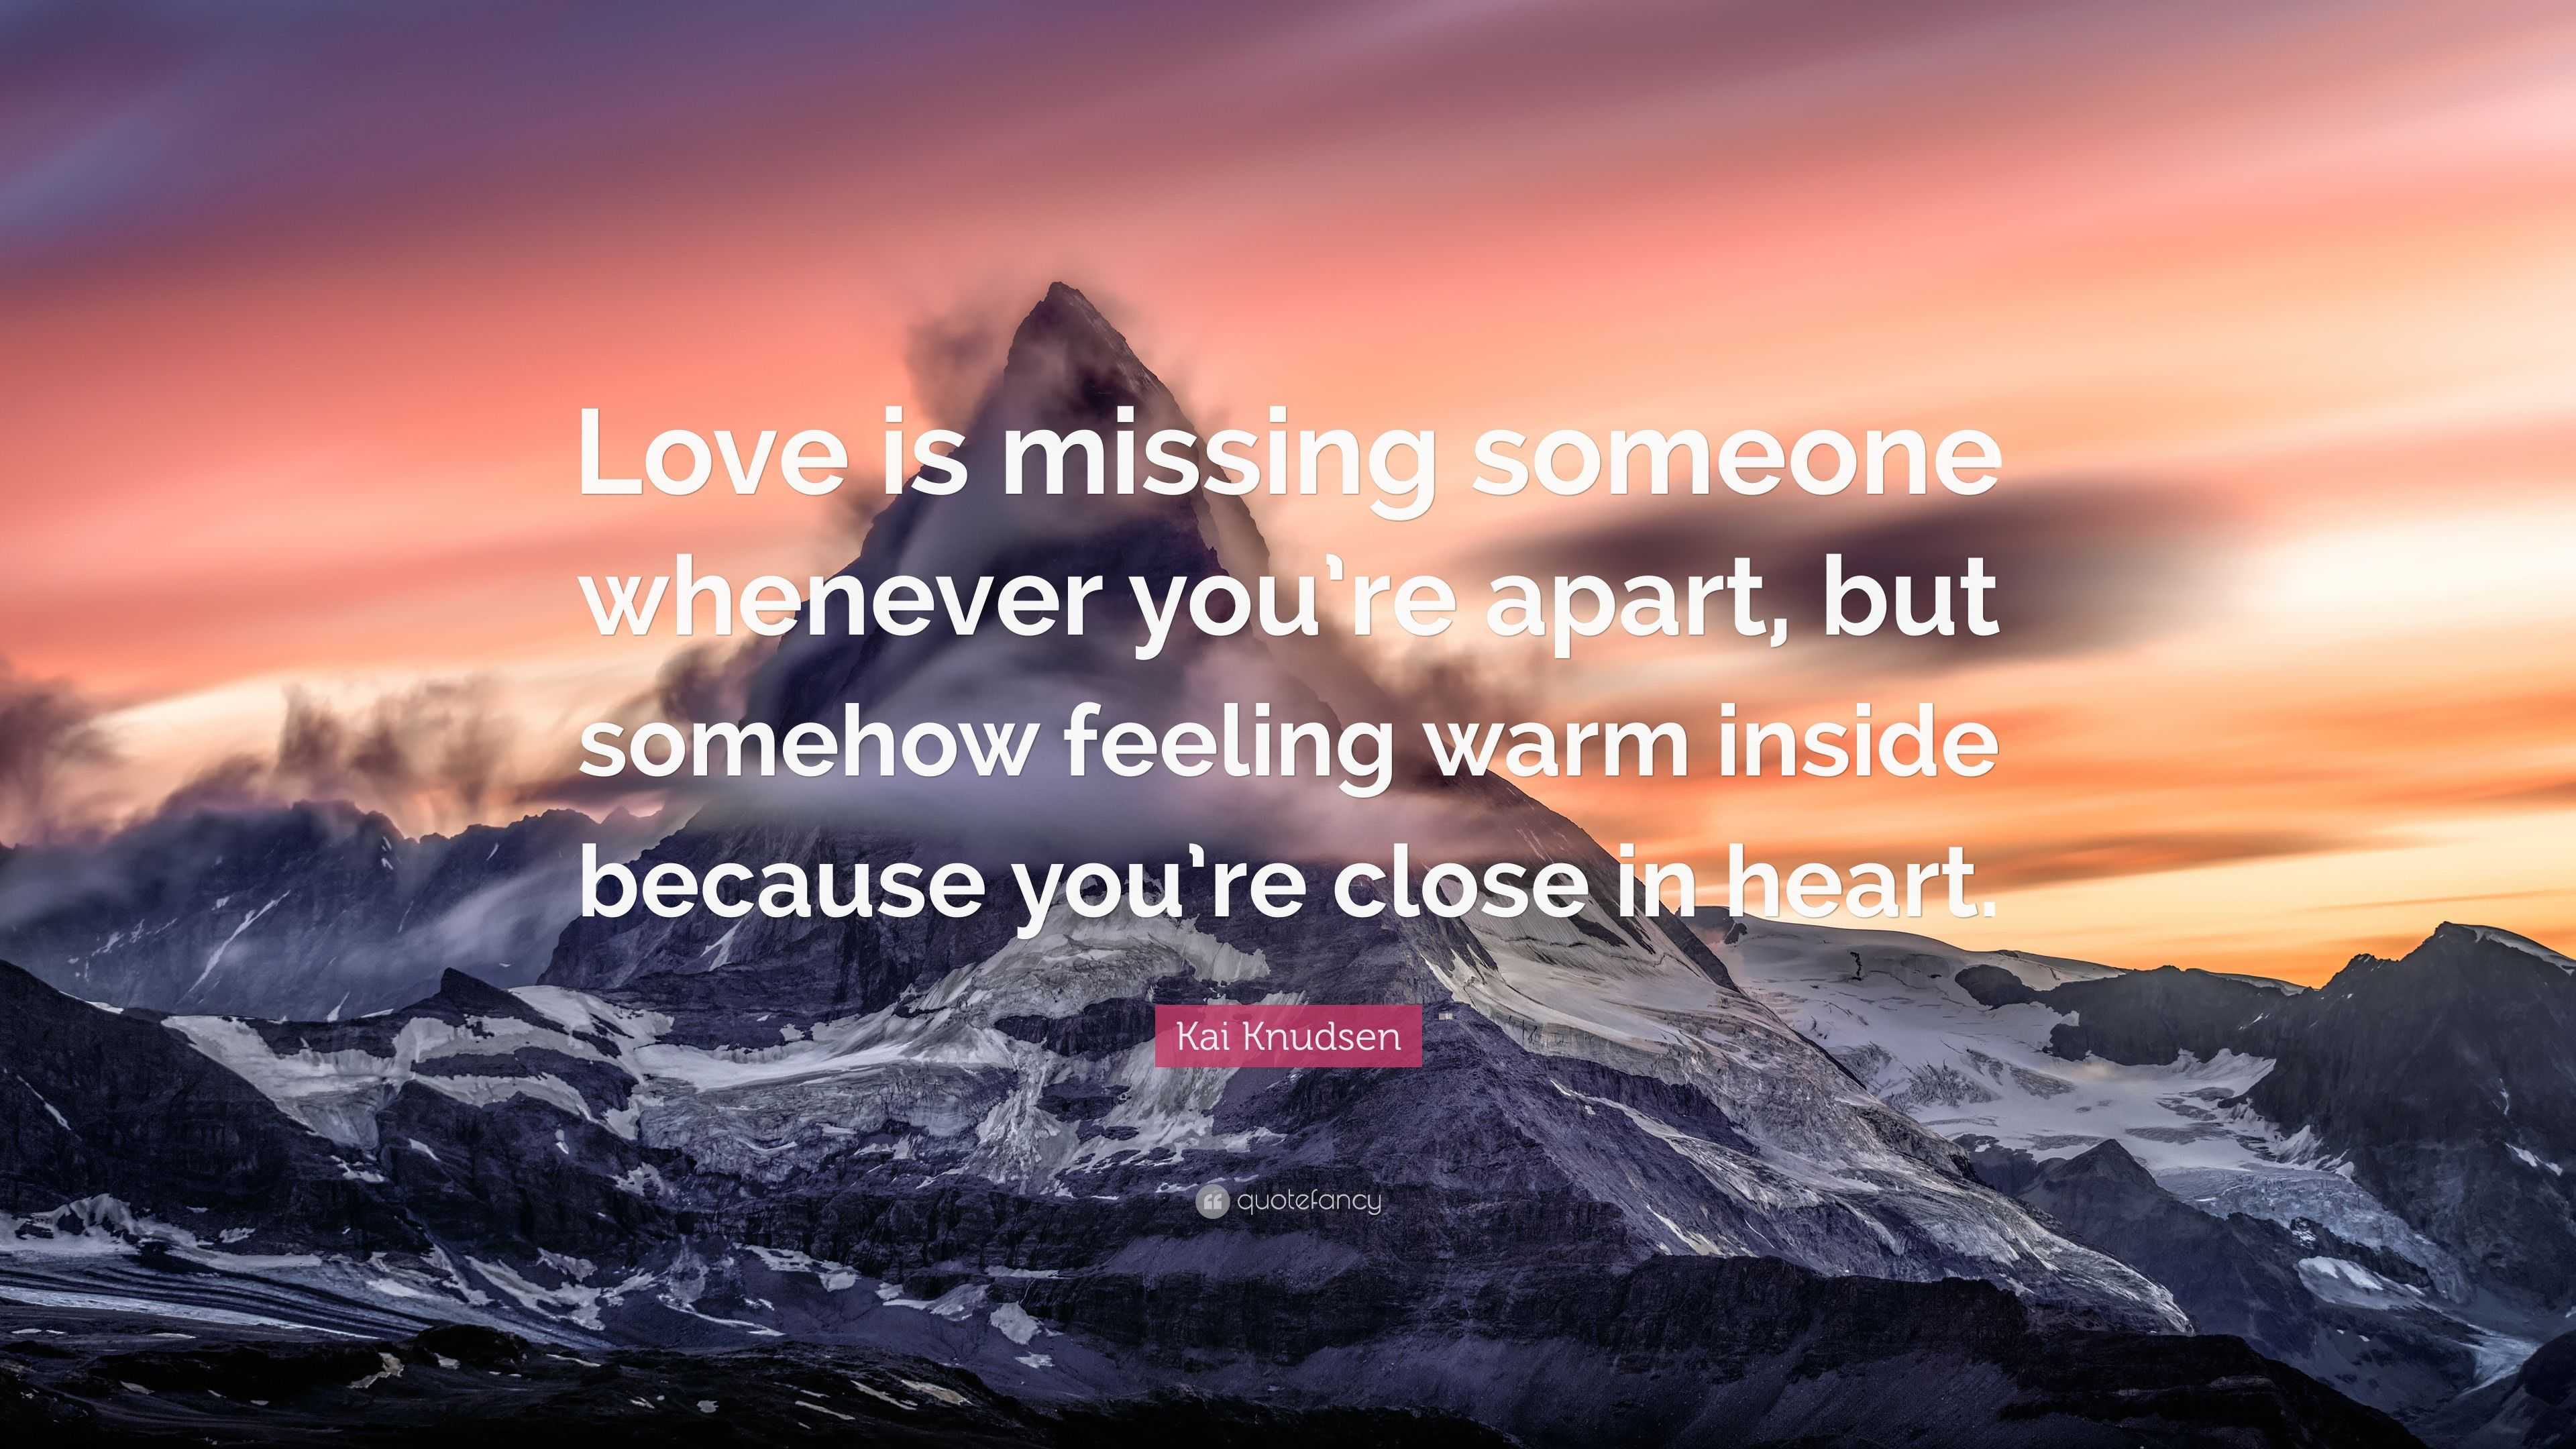 Wise quotes about missing someone